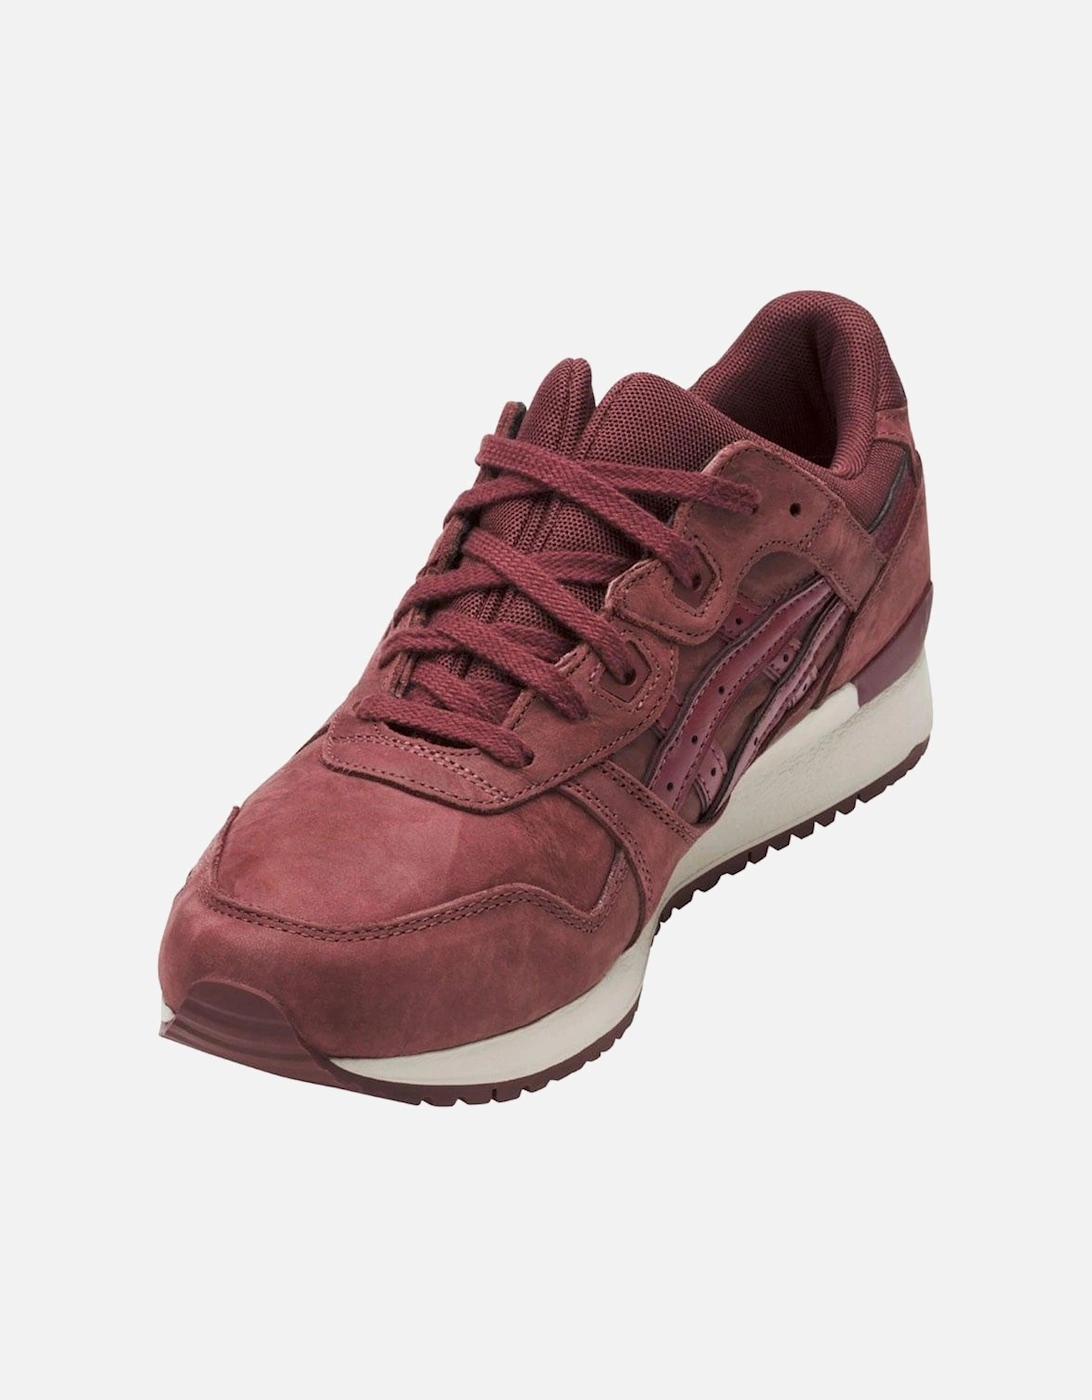 Gell Lyte III Trainers - Russet Brown  HL7V3-2626